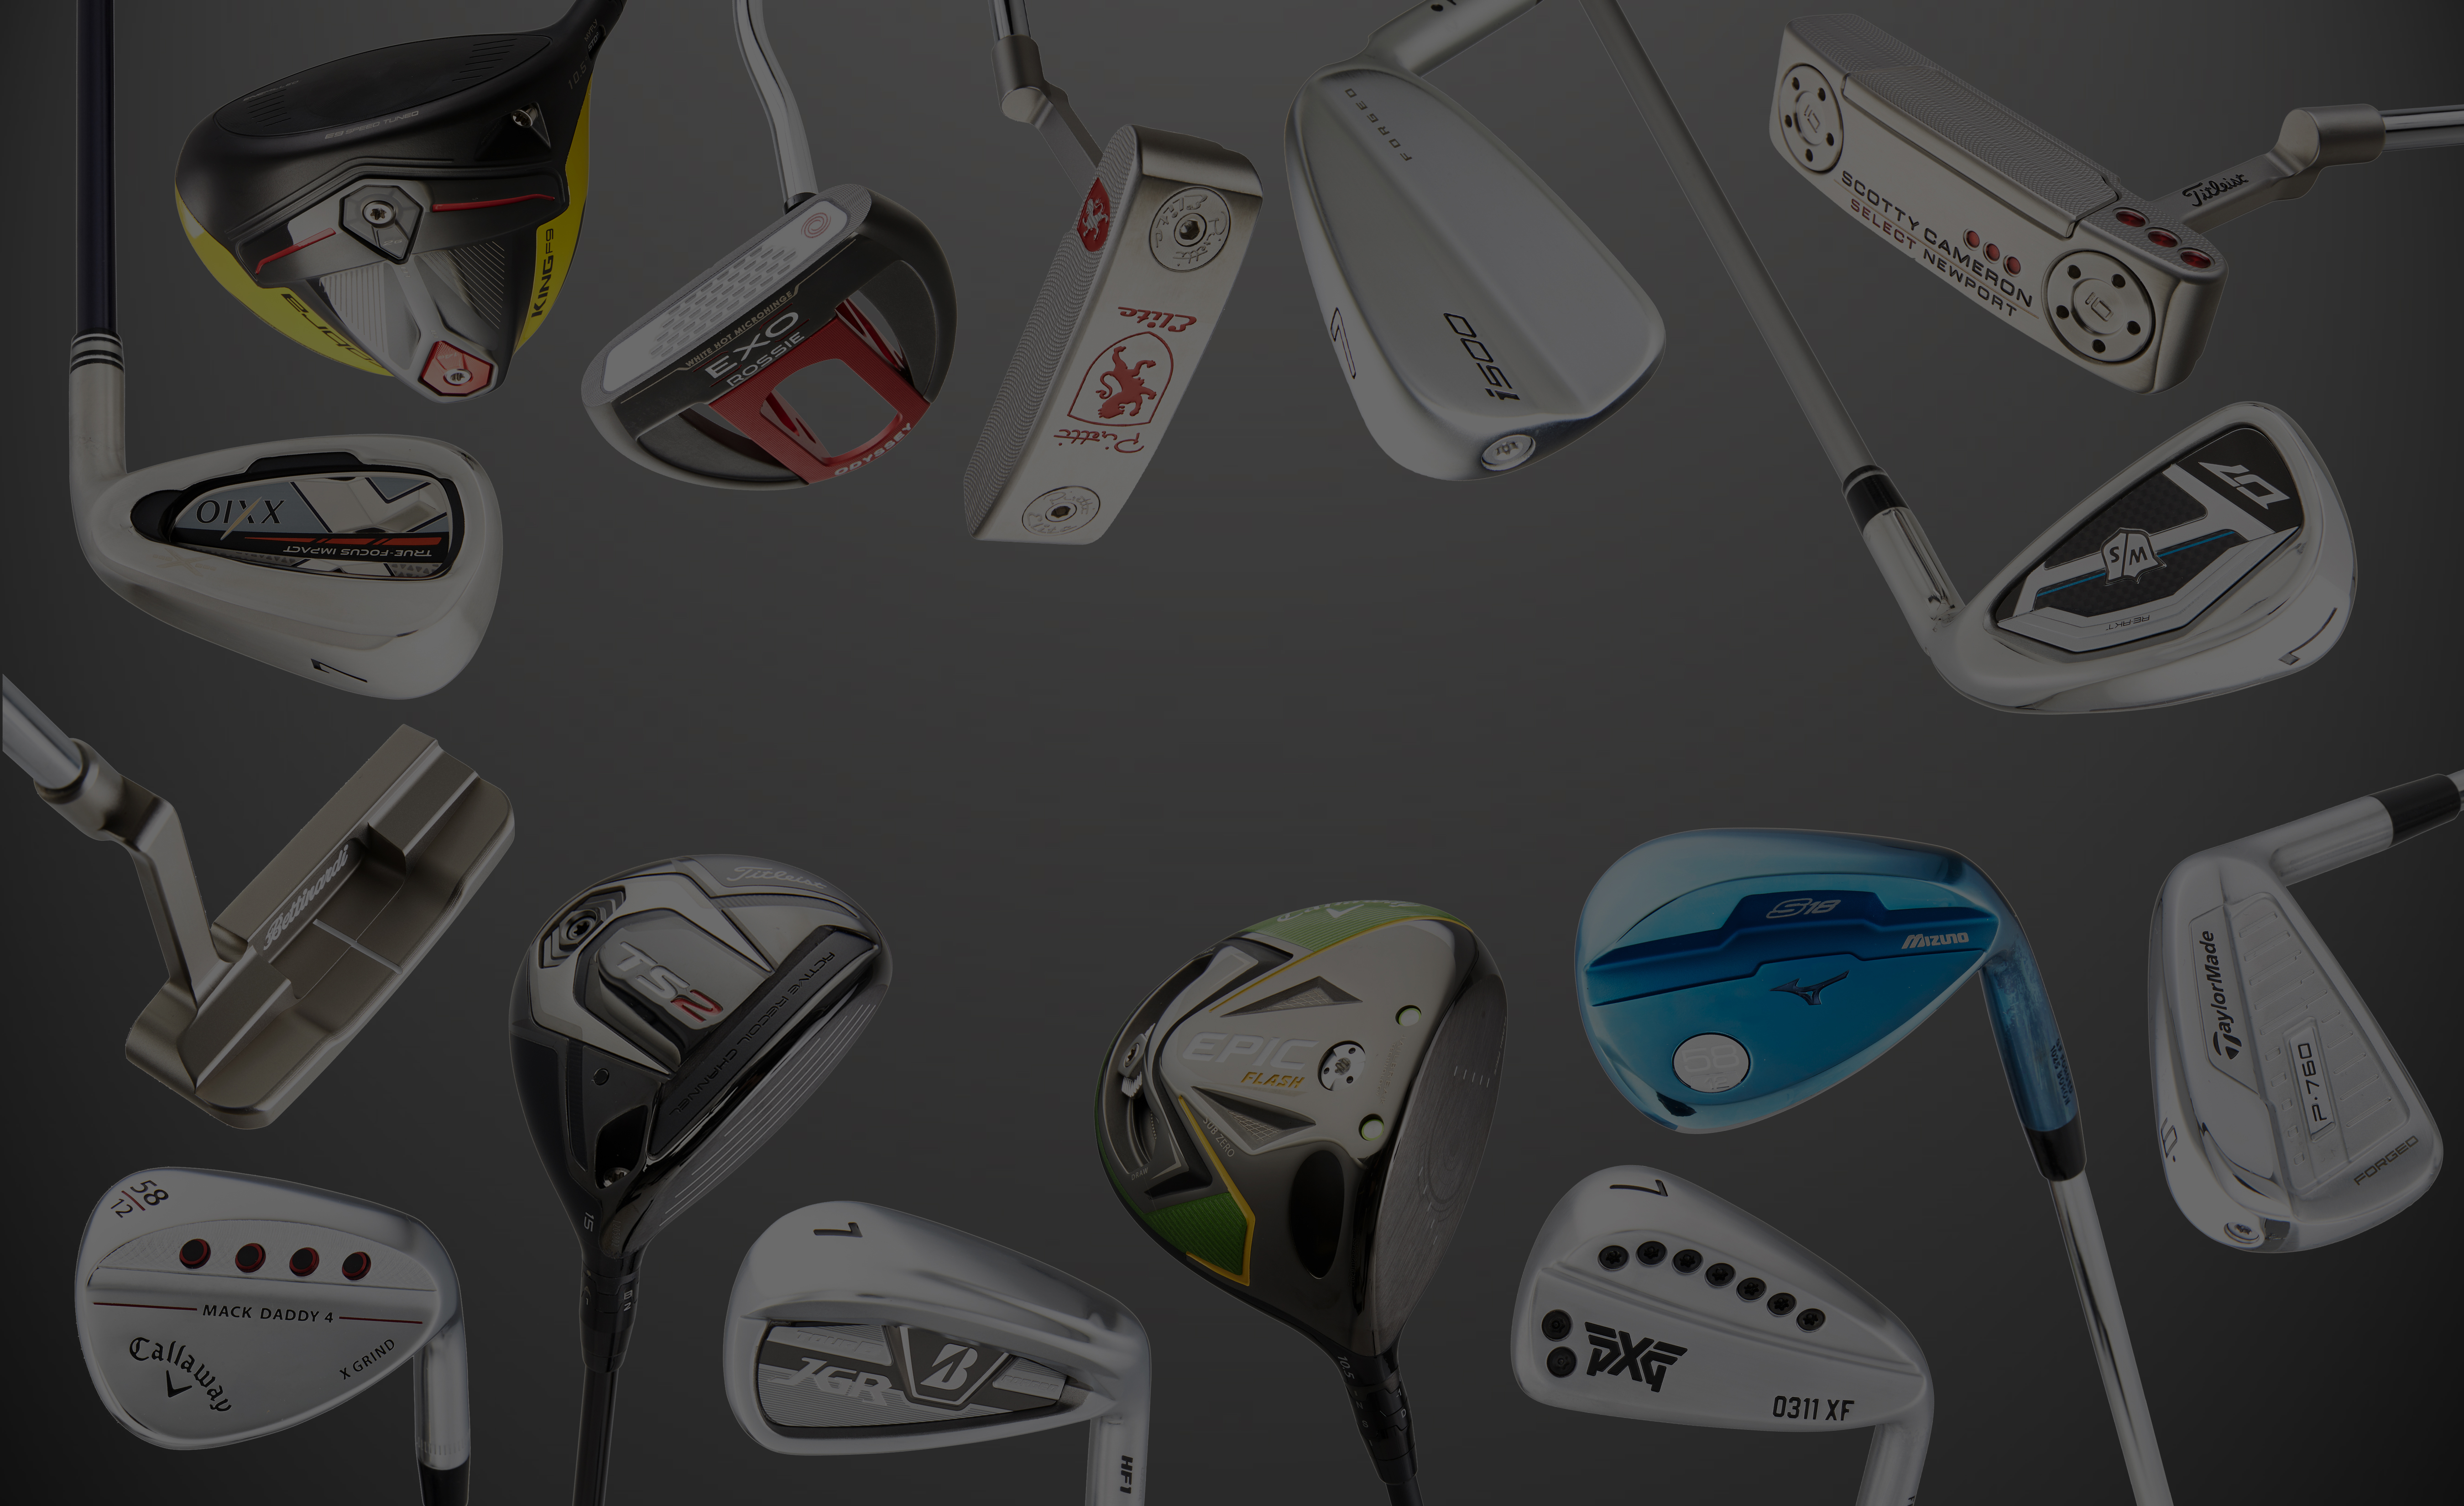 When Should You Change Your Golf Equipment? - Peter Field Golf Shop